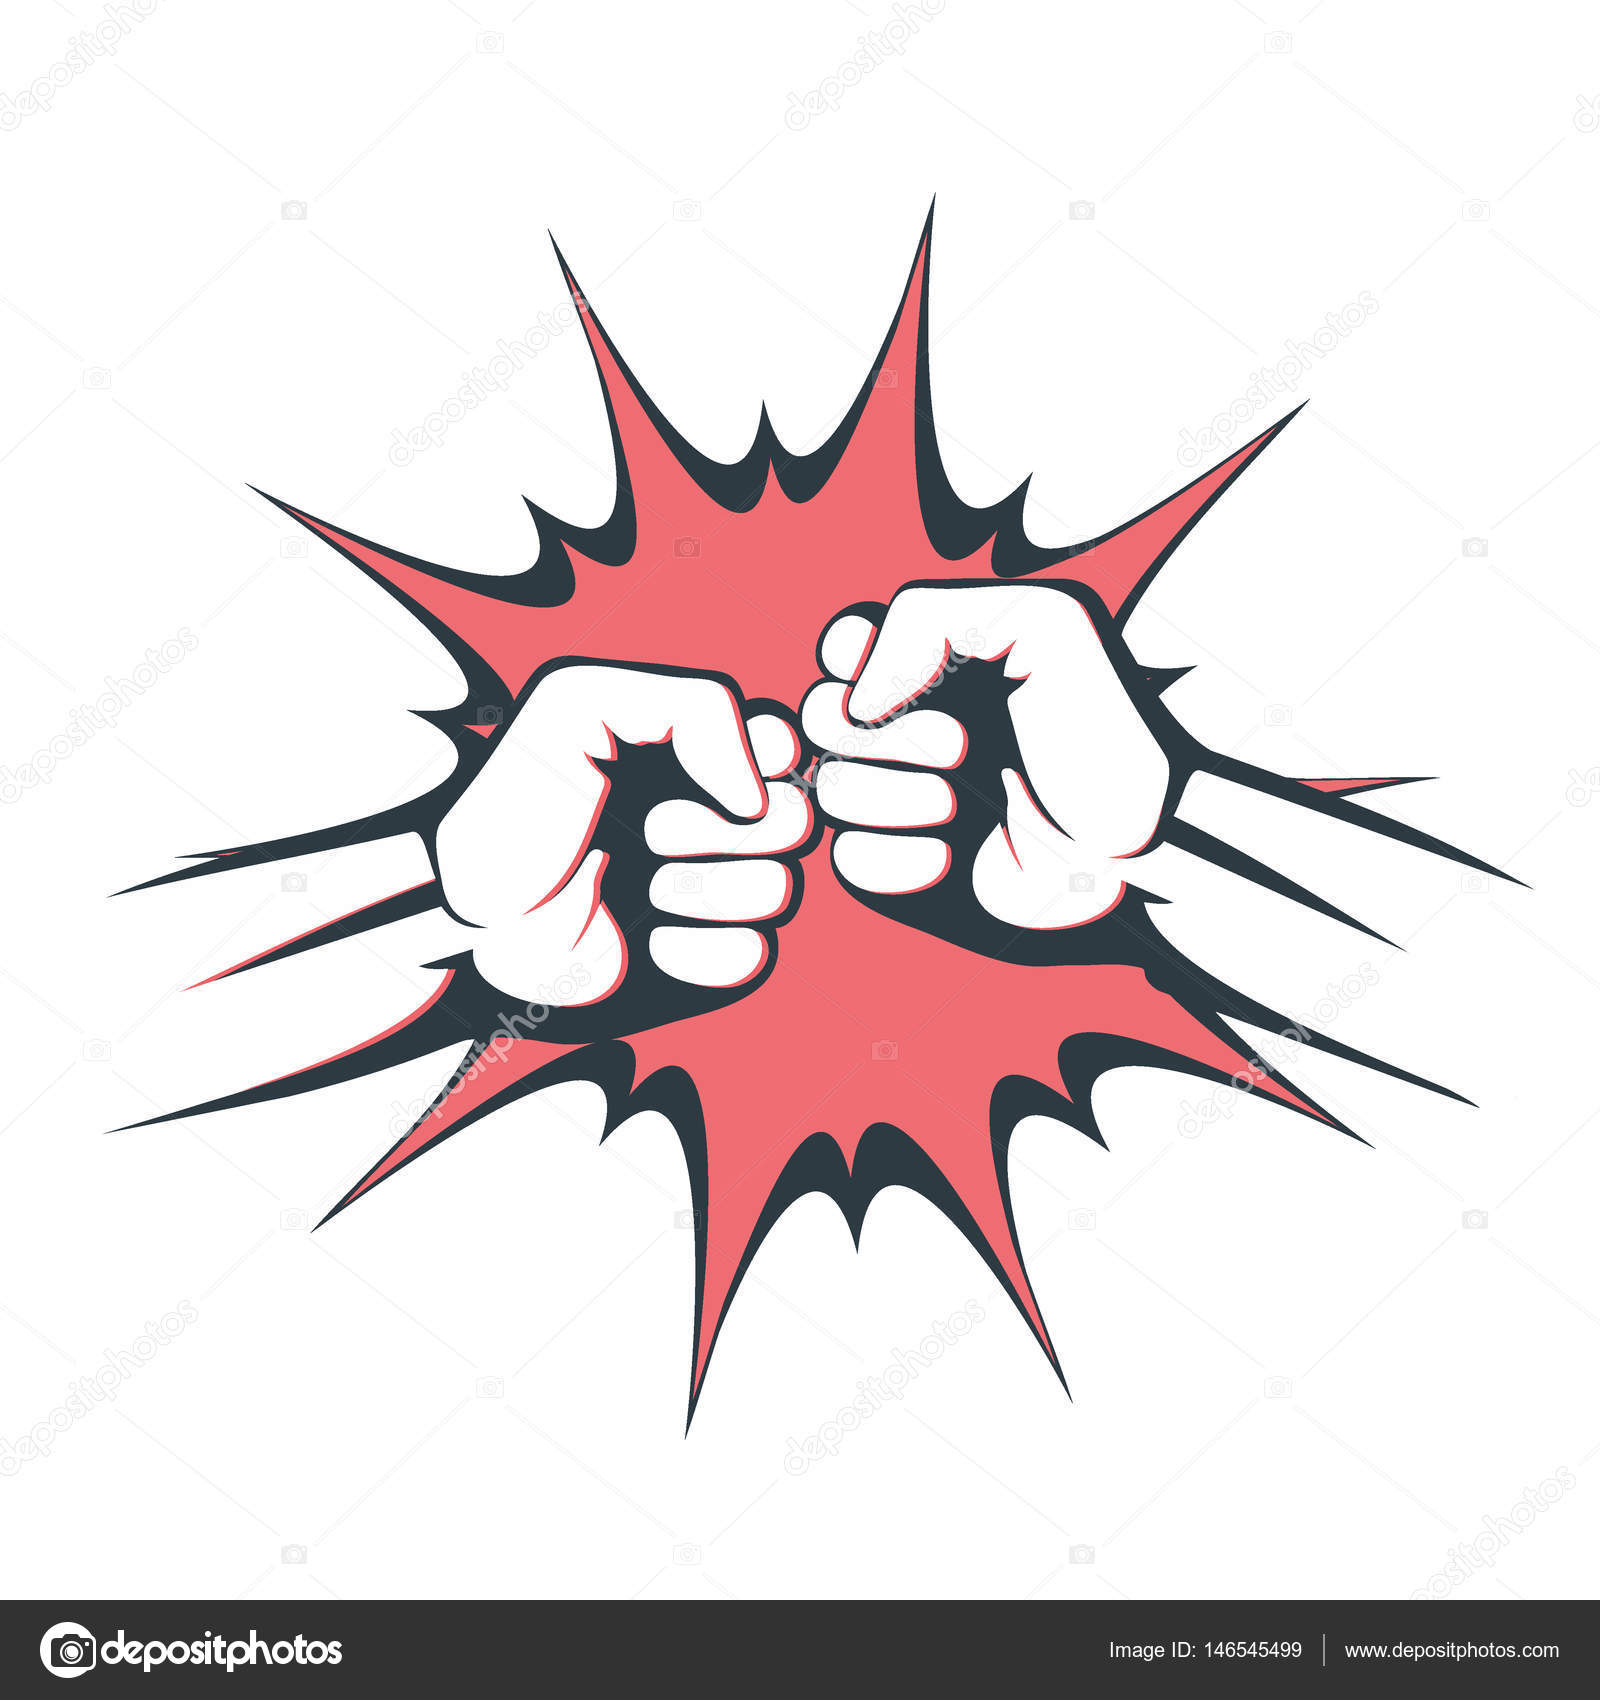 Two fists bumping together vector illustration, two hands with fists ...